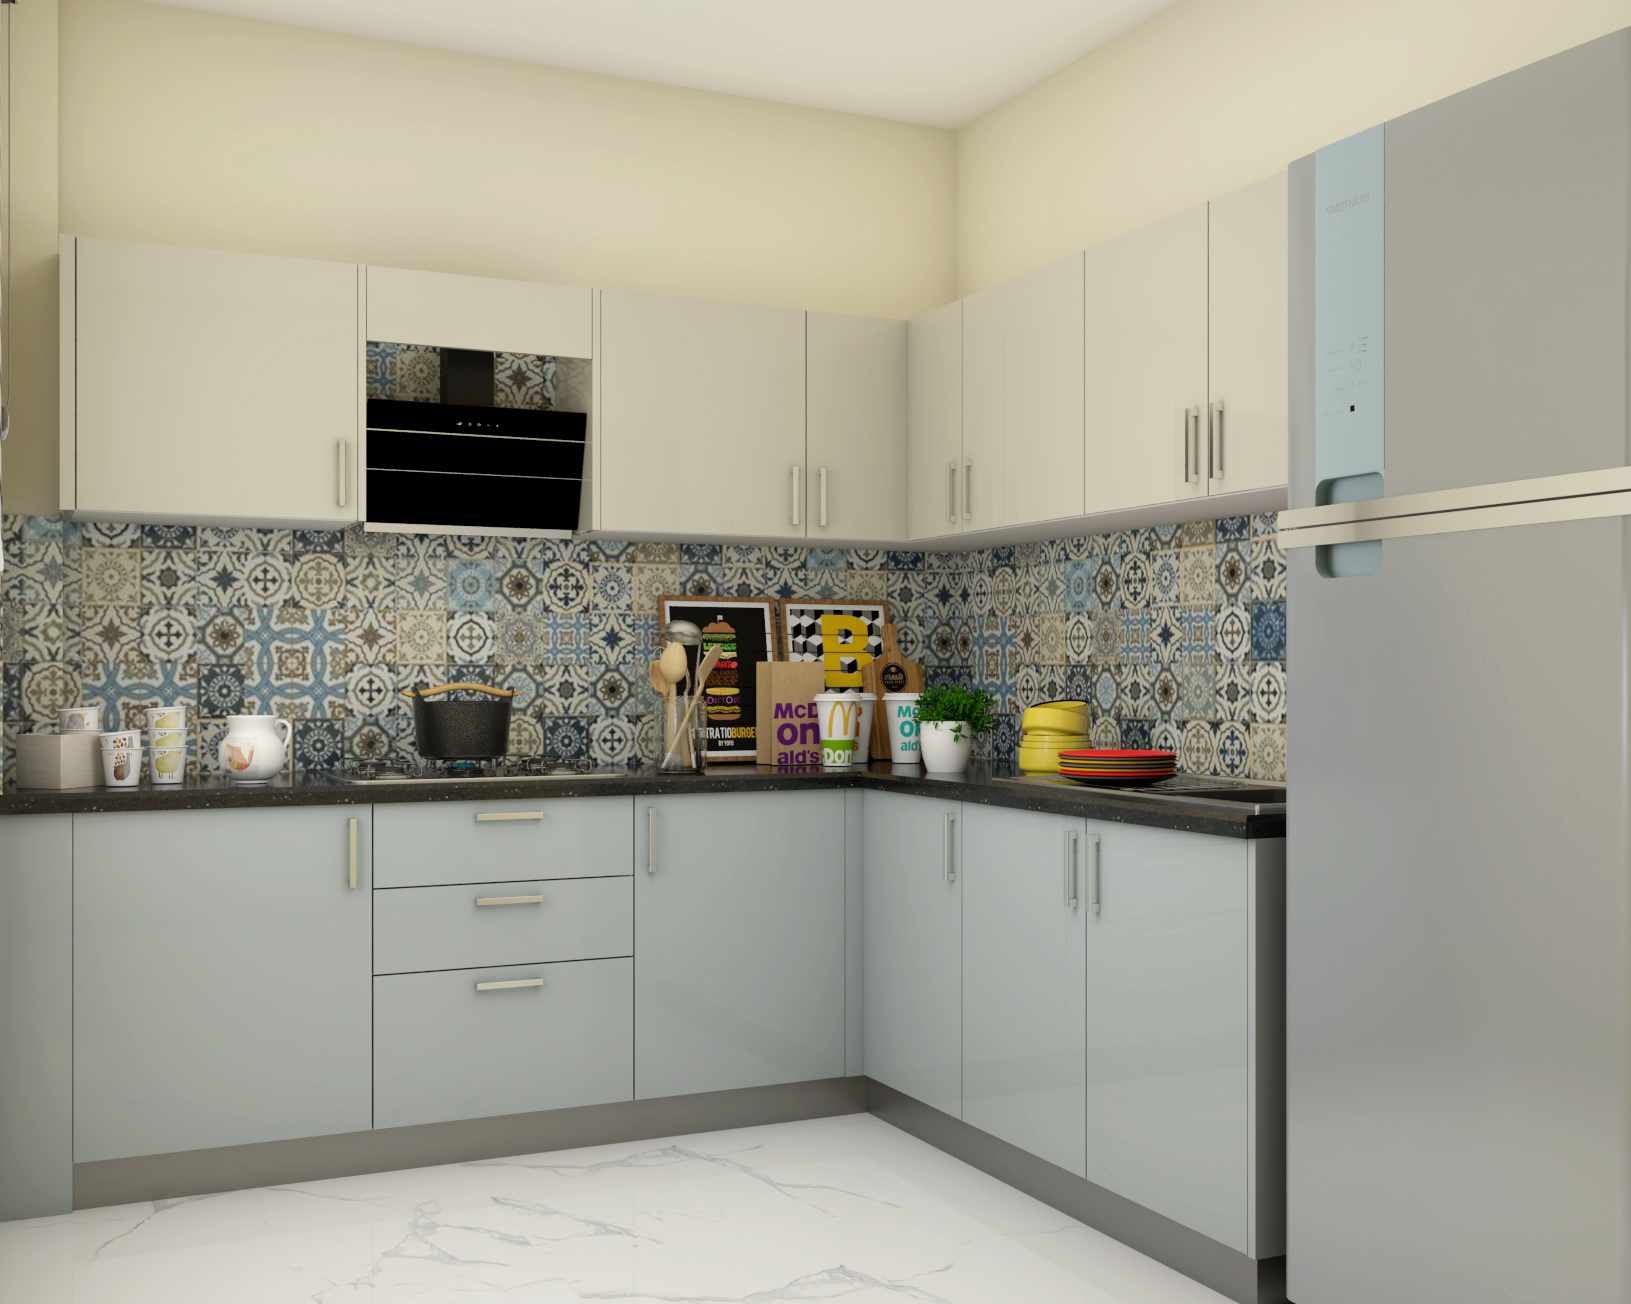 Compact Modular L-Shaped Kitchen Design With Colourful Dado Tiles